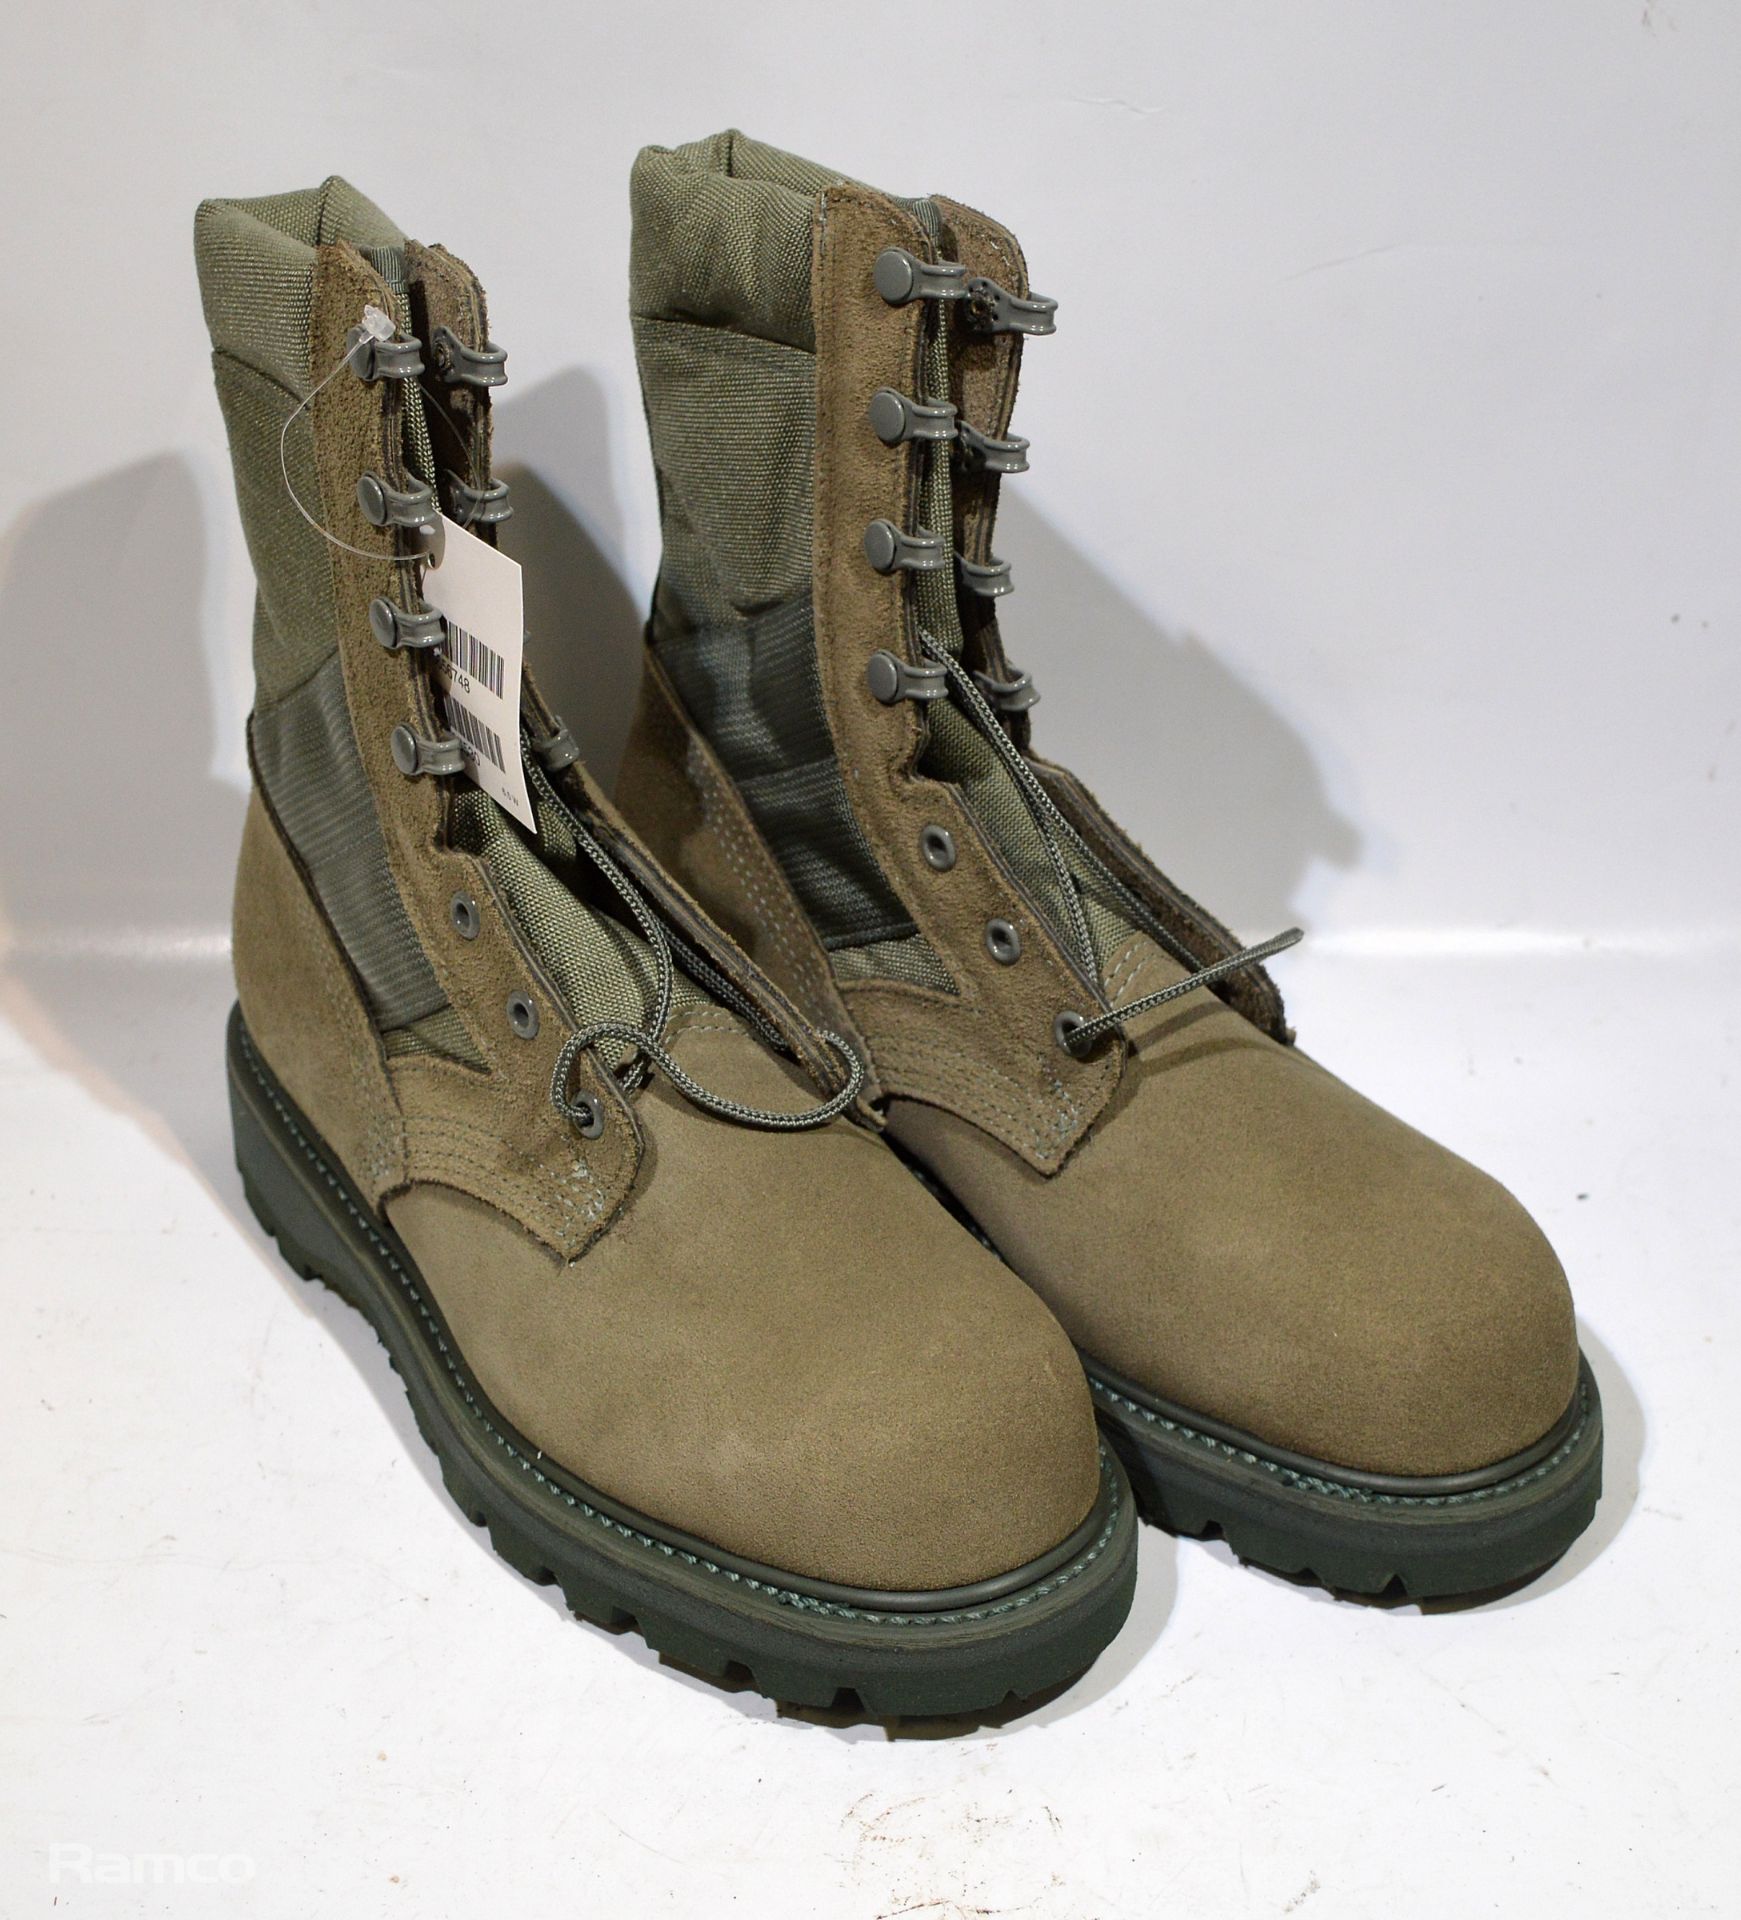 Thorogood Hot Weather Boots - 3 pairs - 6 1/2W - Image 2 of 3